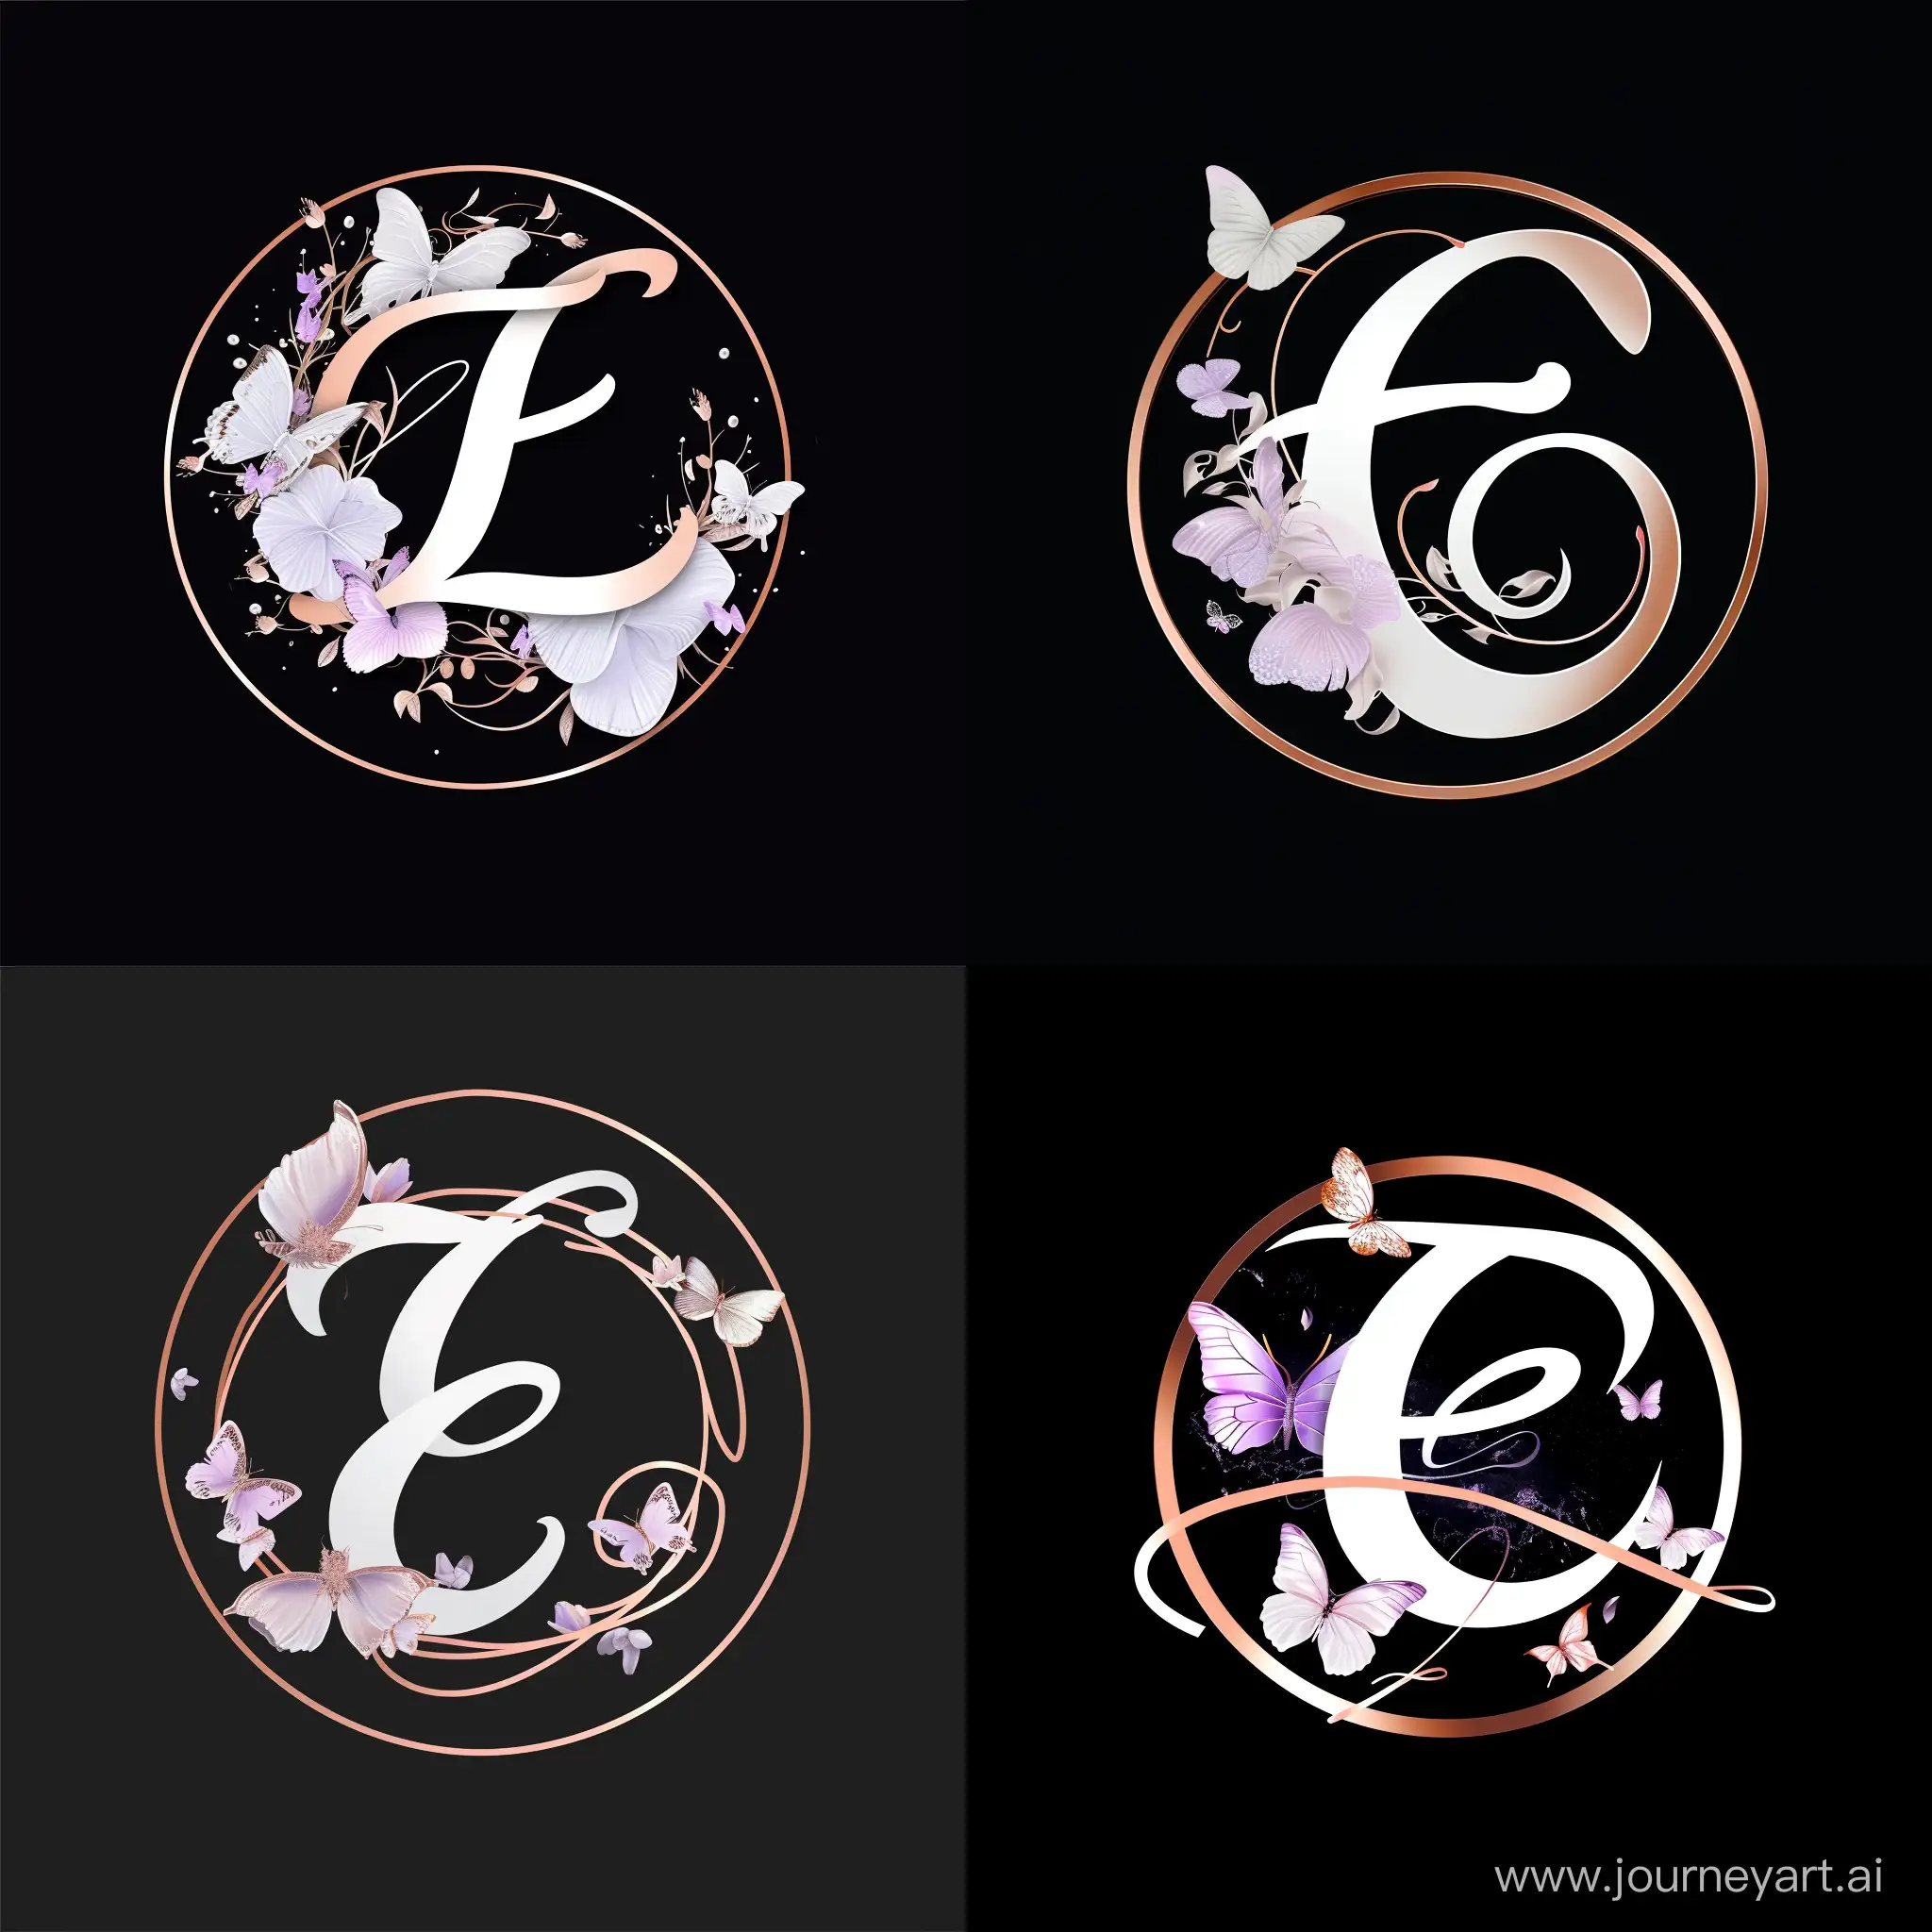 Make a realistic and elegant logo for a high prestige beauty business. Have a big realistic cursive letter E in the middle thats color white with some lilac. Include some small realistic butterflies. Have it all in a rose gold circle. Make the background black.